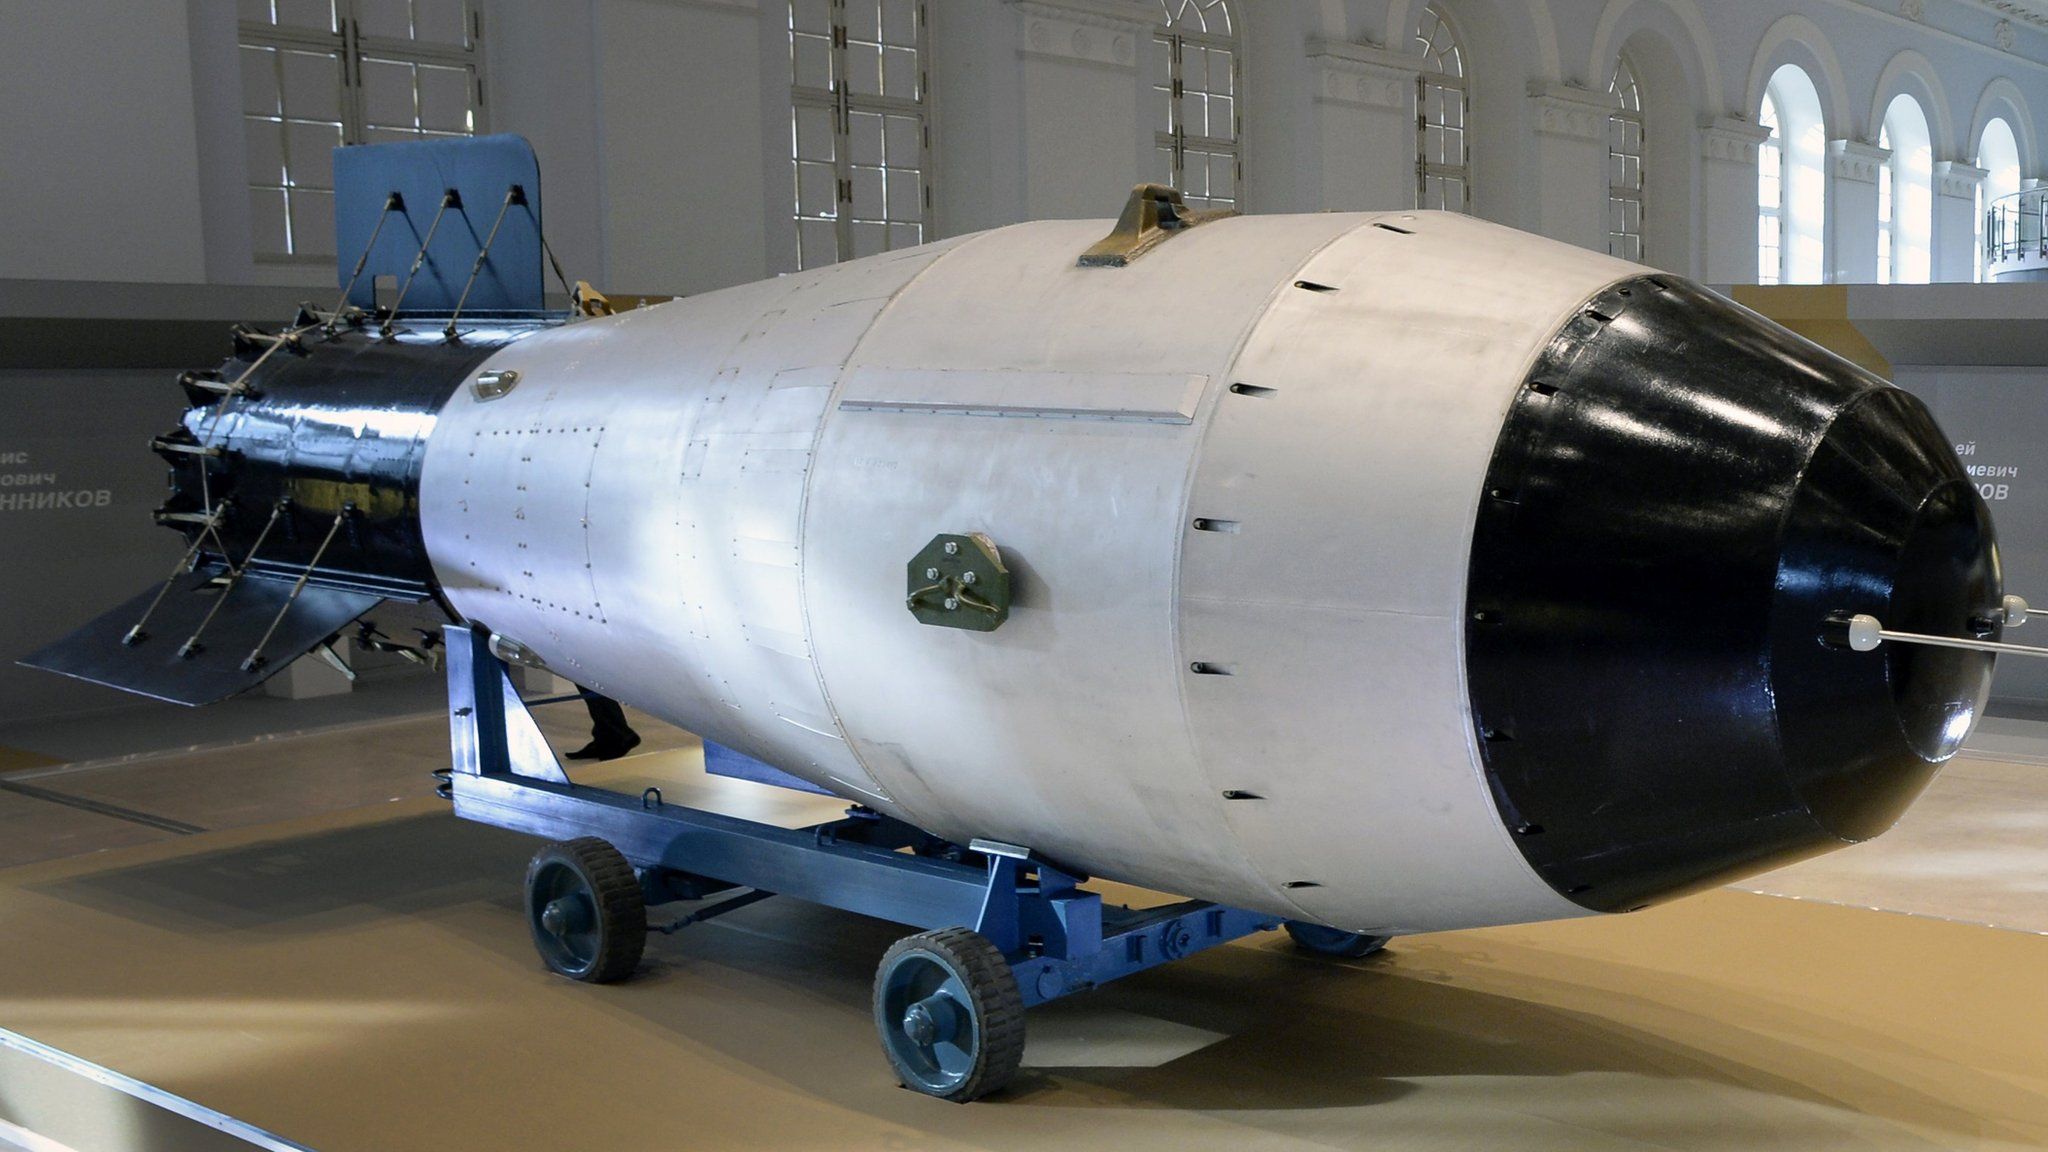 A mockup of a Soviet AN-602 hydrogen bomb displayed at the Sarov factory museum